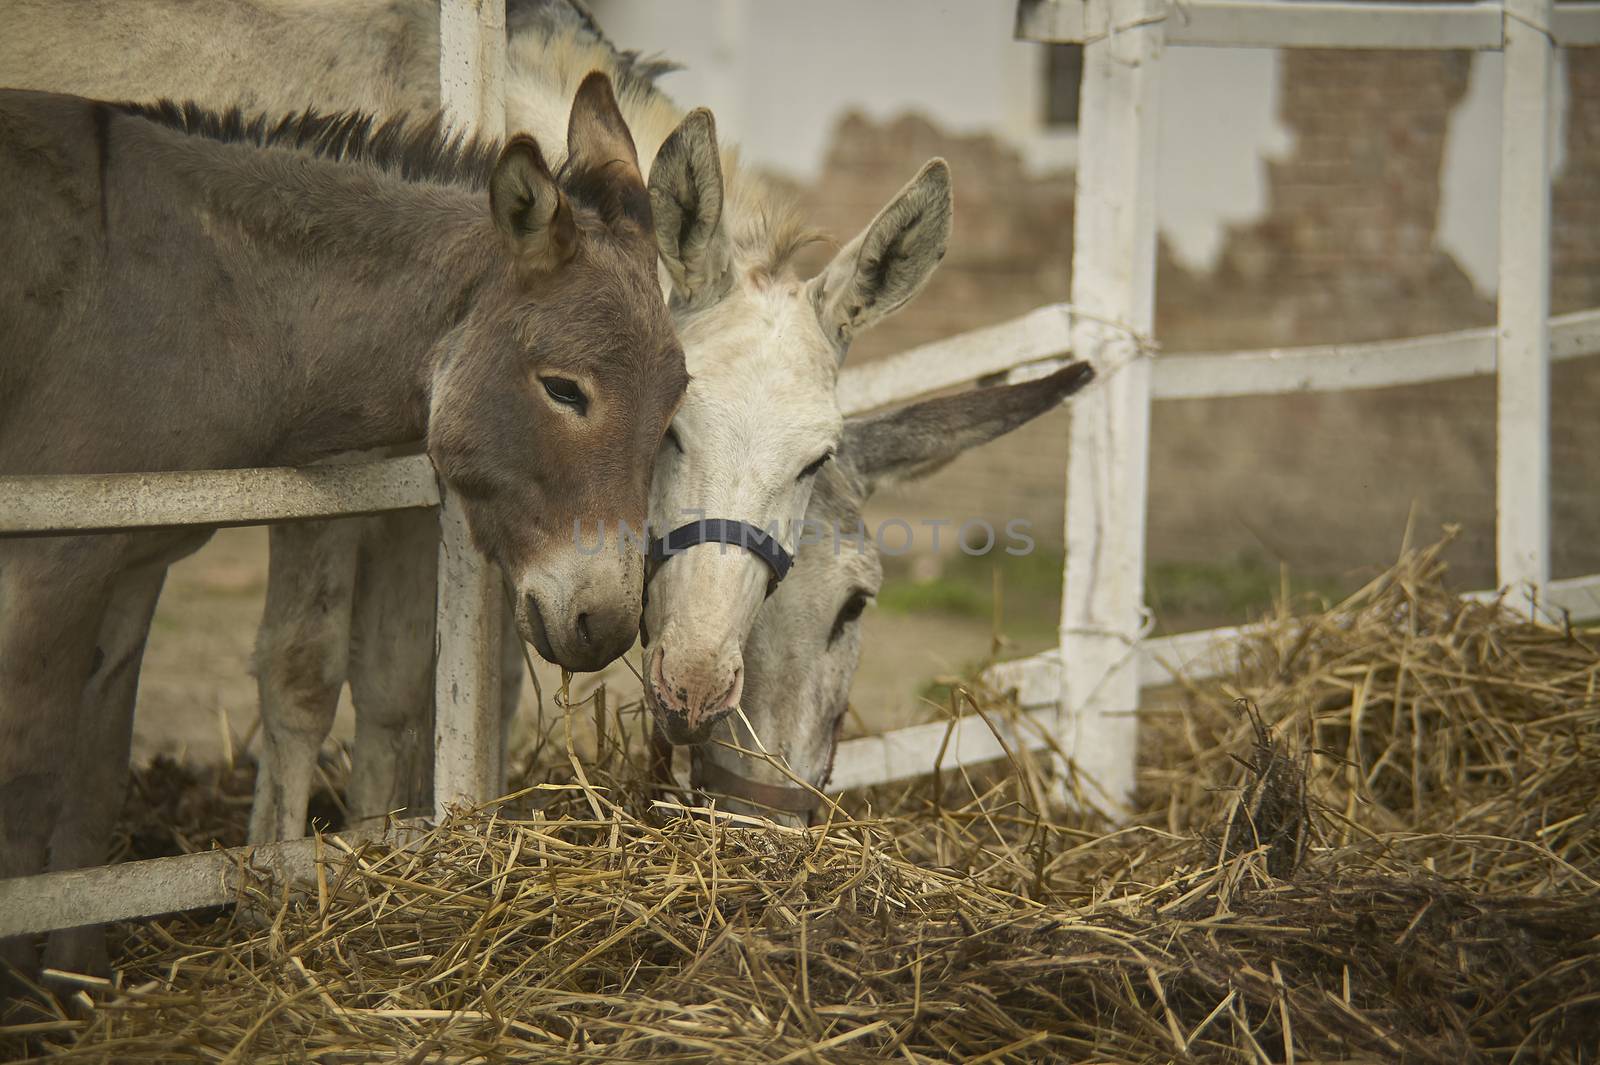 Three donkeys in an organic farmhouse intended to eat hay and straw